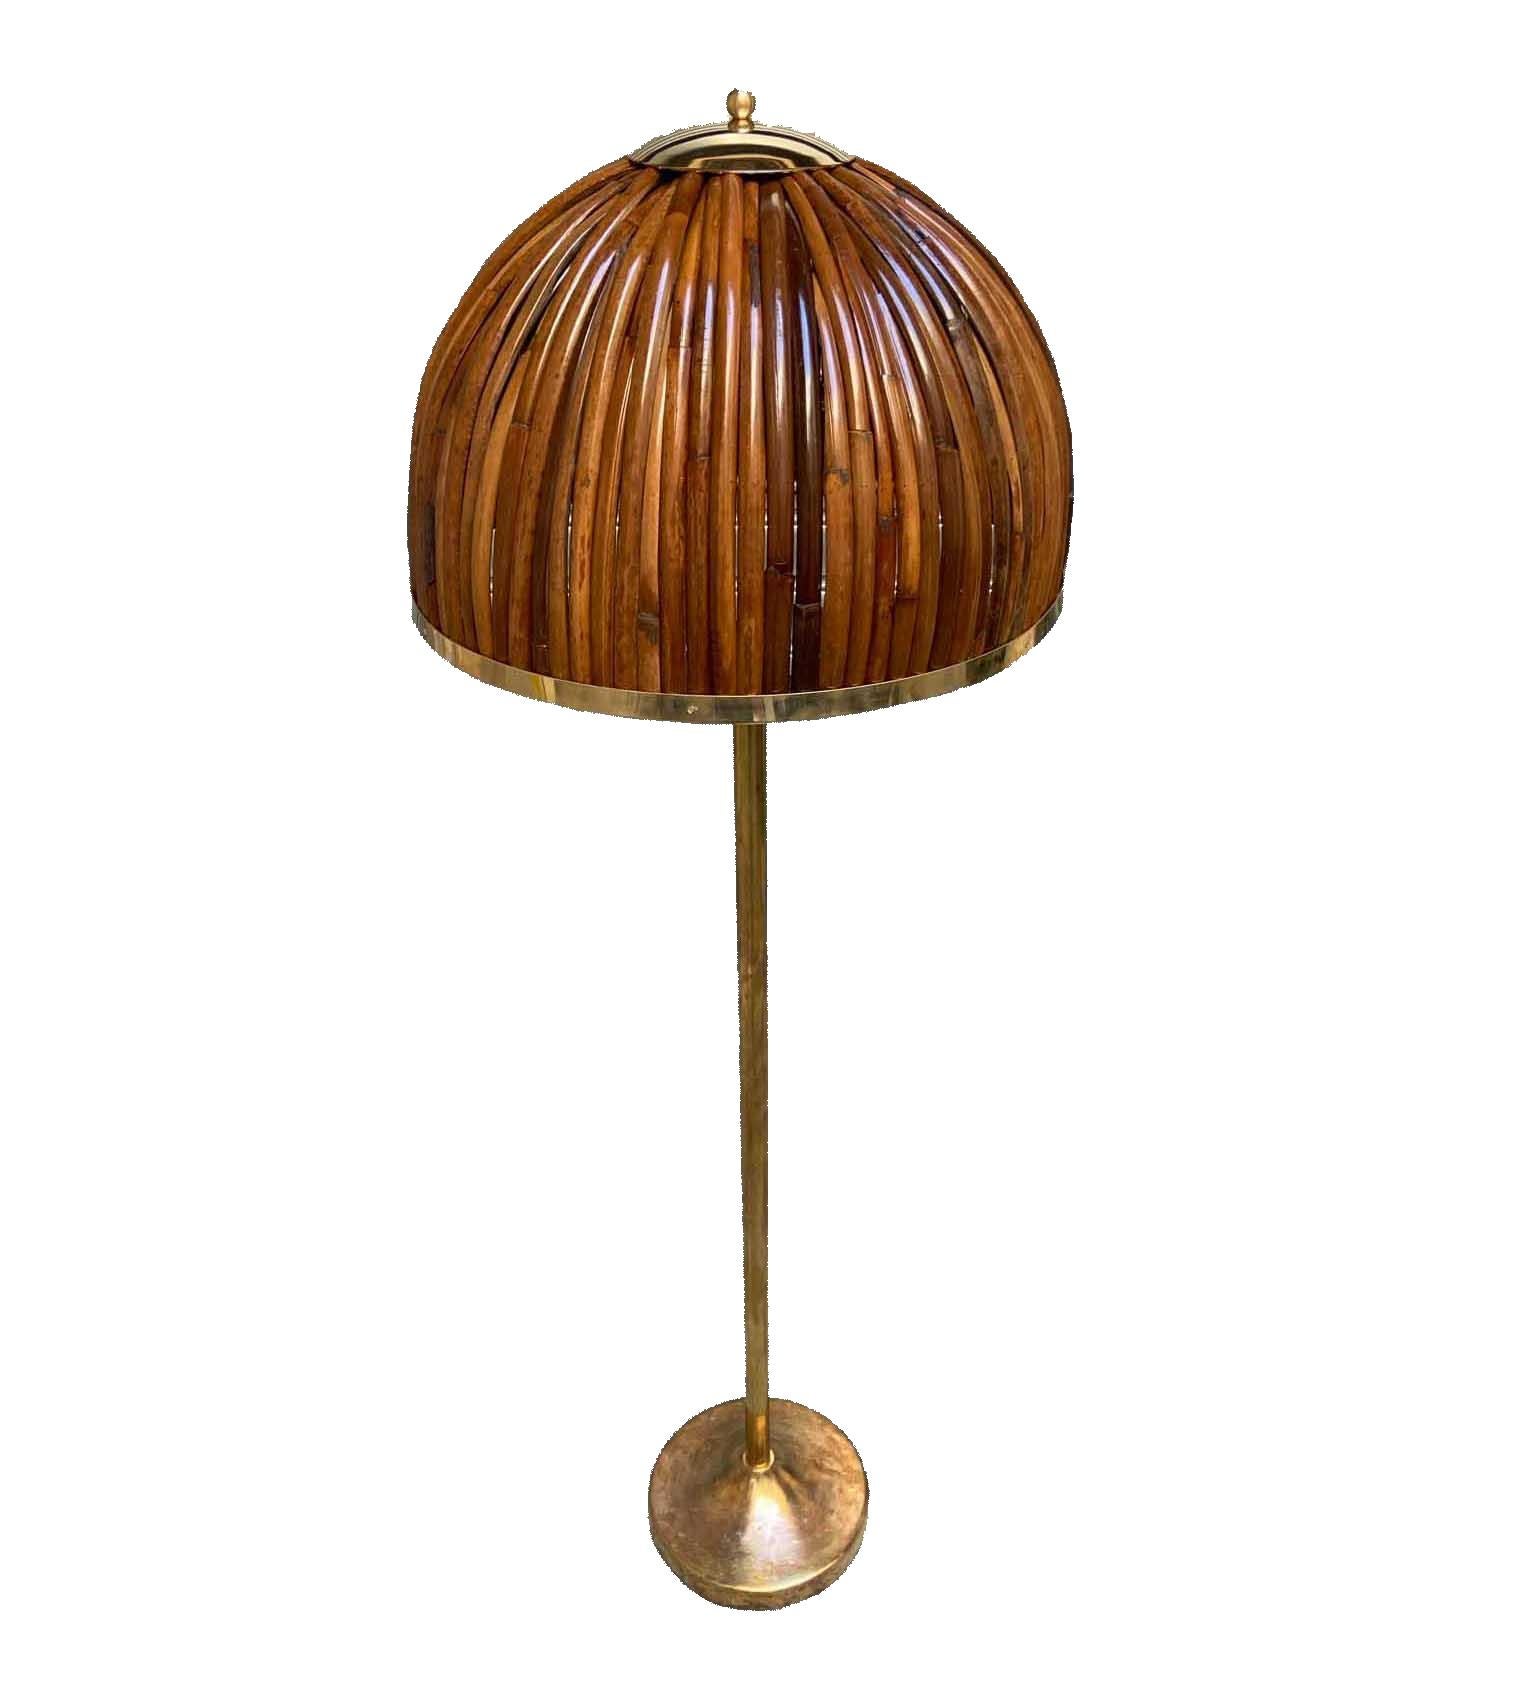 Brass and rattan floor lamp, Italy late 1990s
The floor lamp is made of brass while the domed shade is composed of many pieces of bamboo edged with a brass ring. The details are also made of brass.
 Very good condition and patina and signs of age